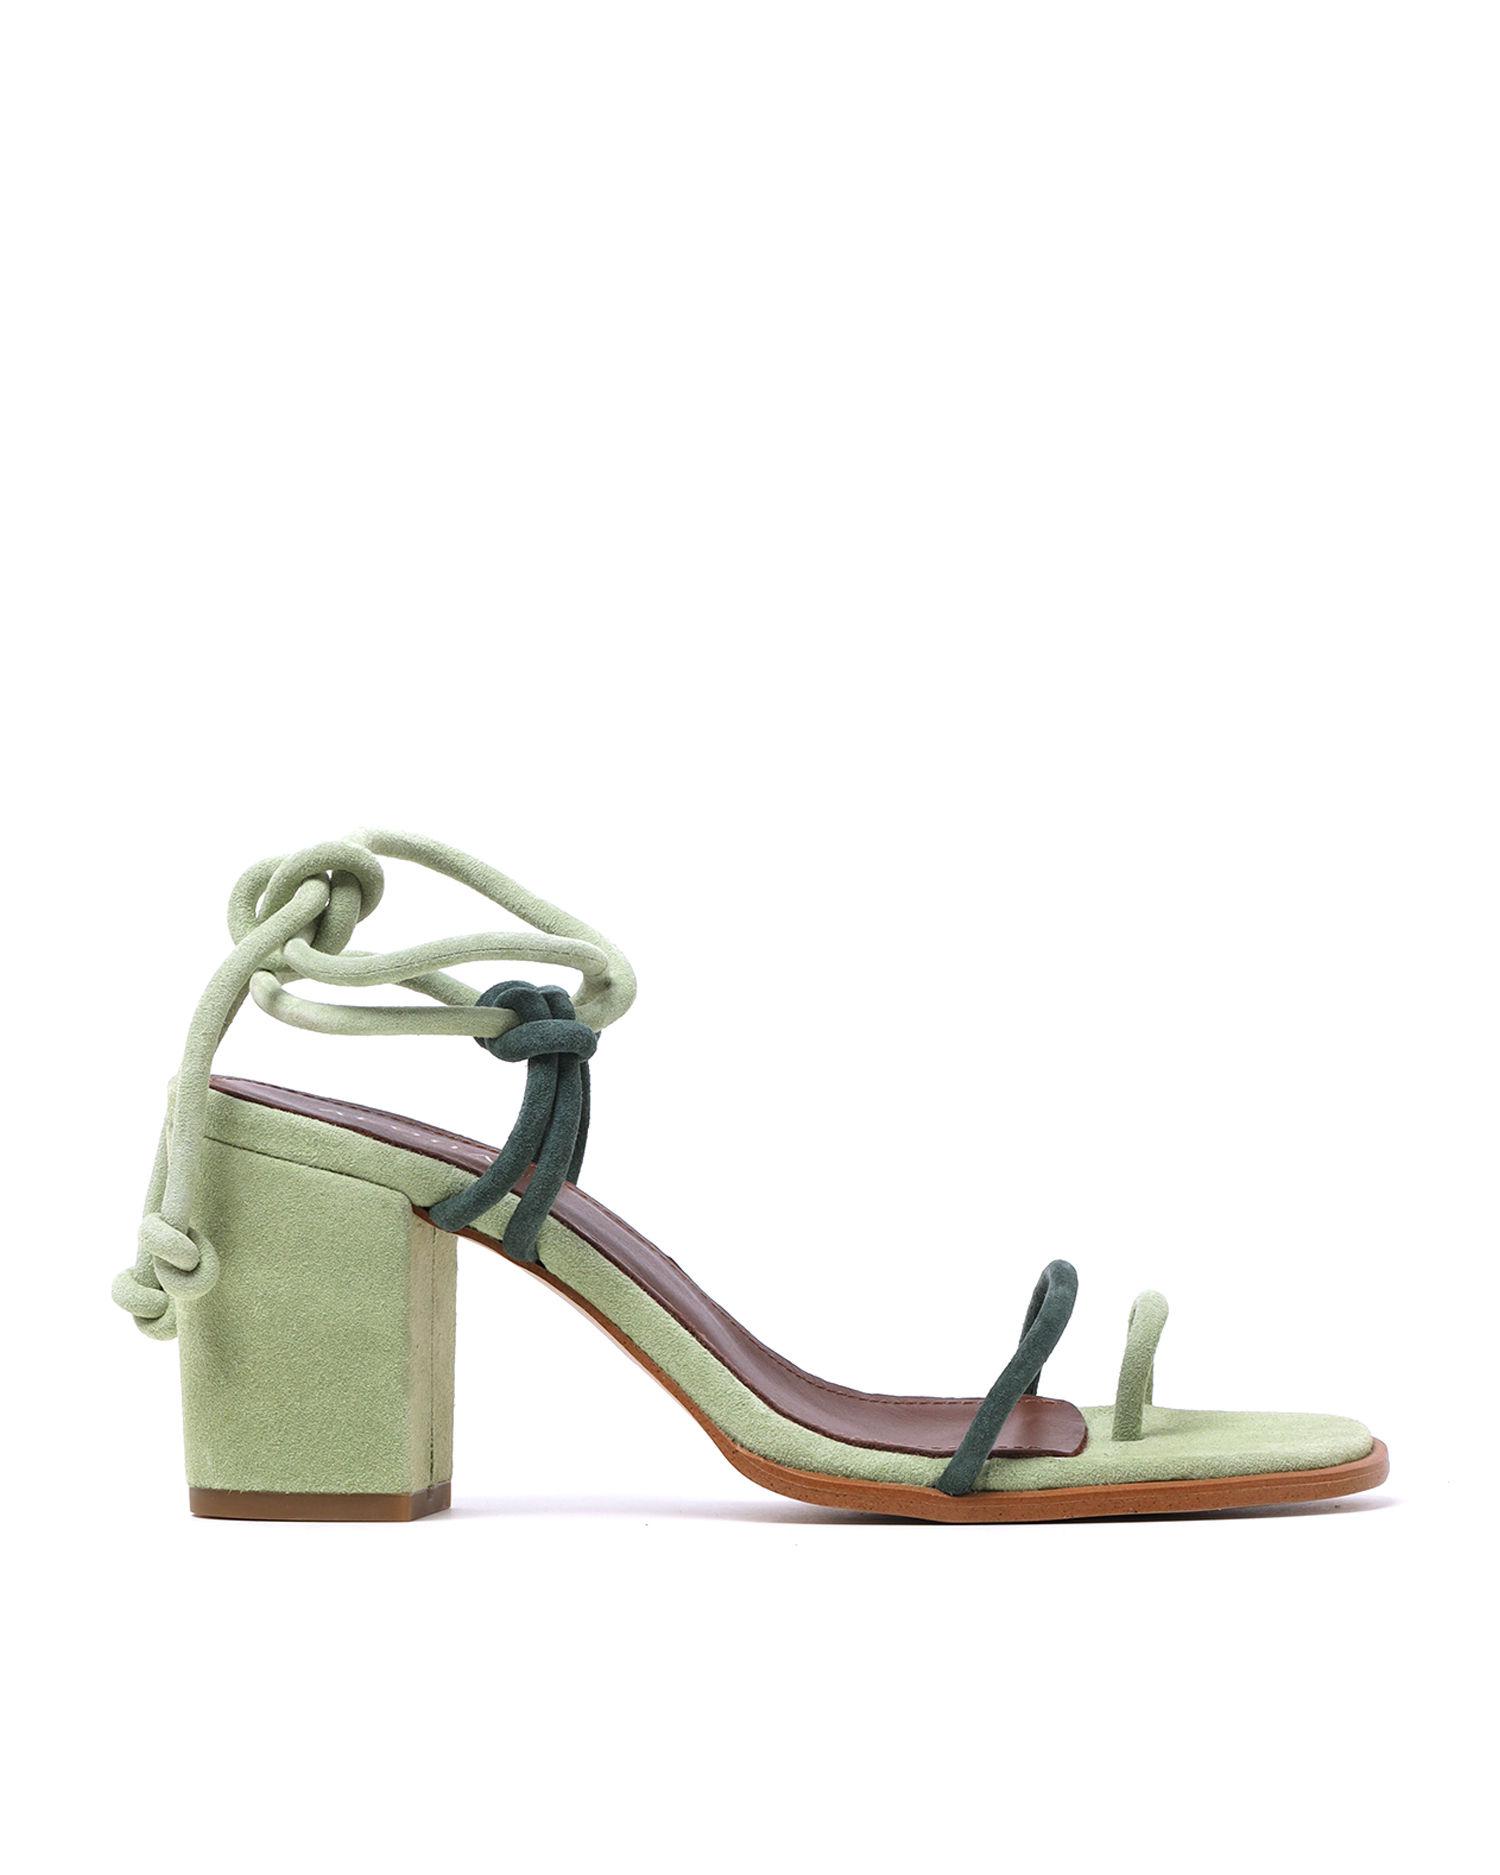 Grace strappy sandals by ALOHAS